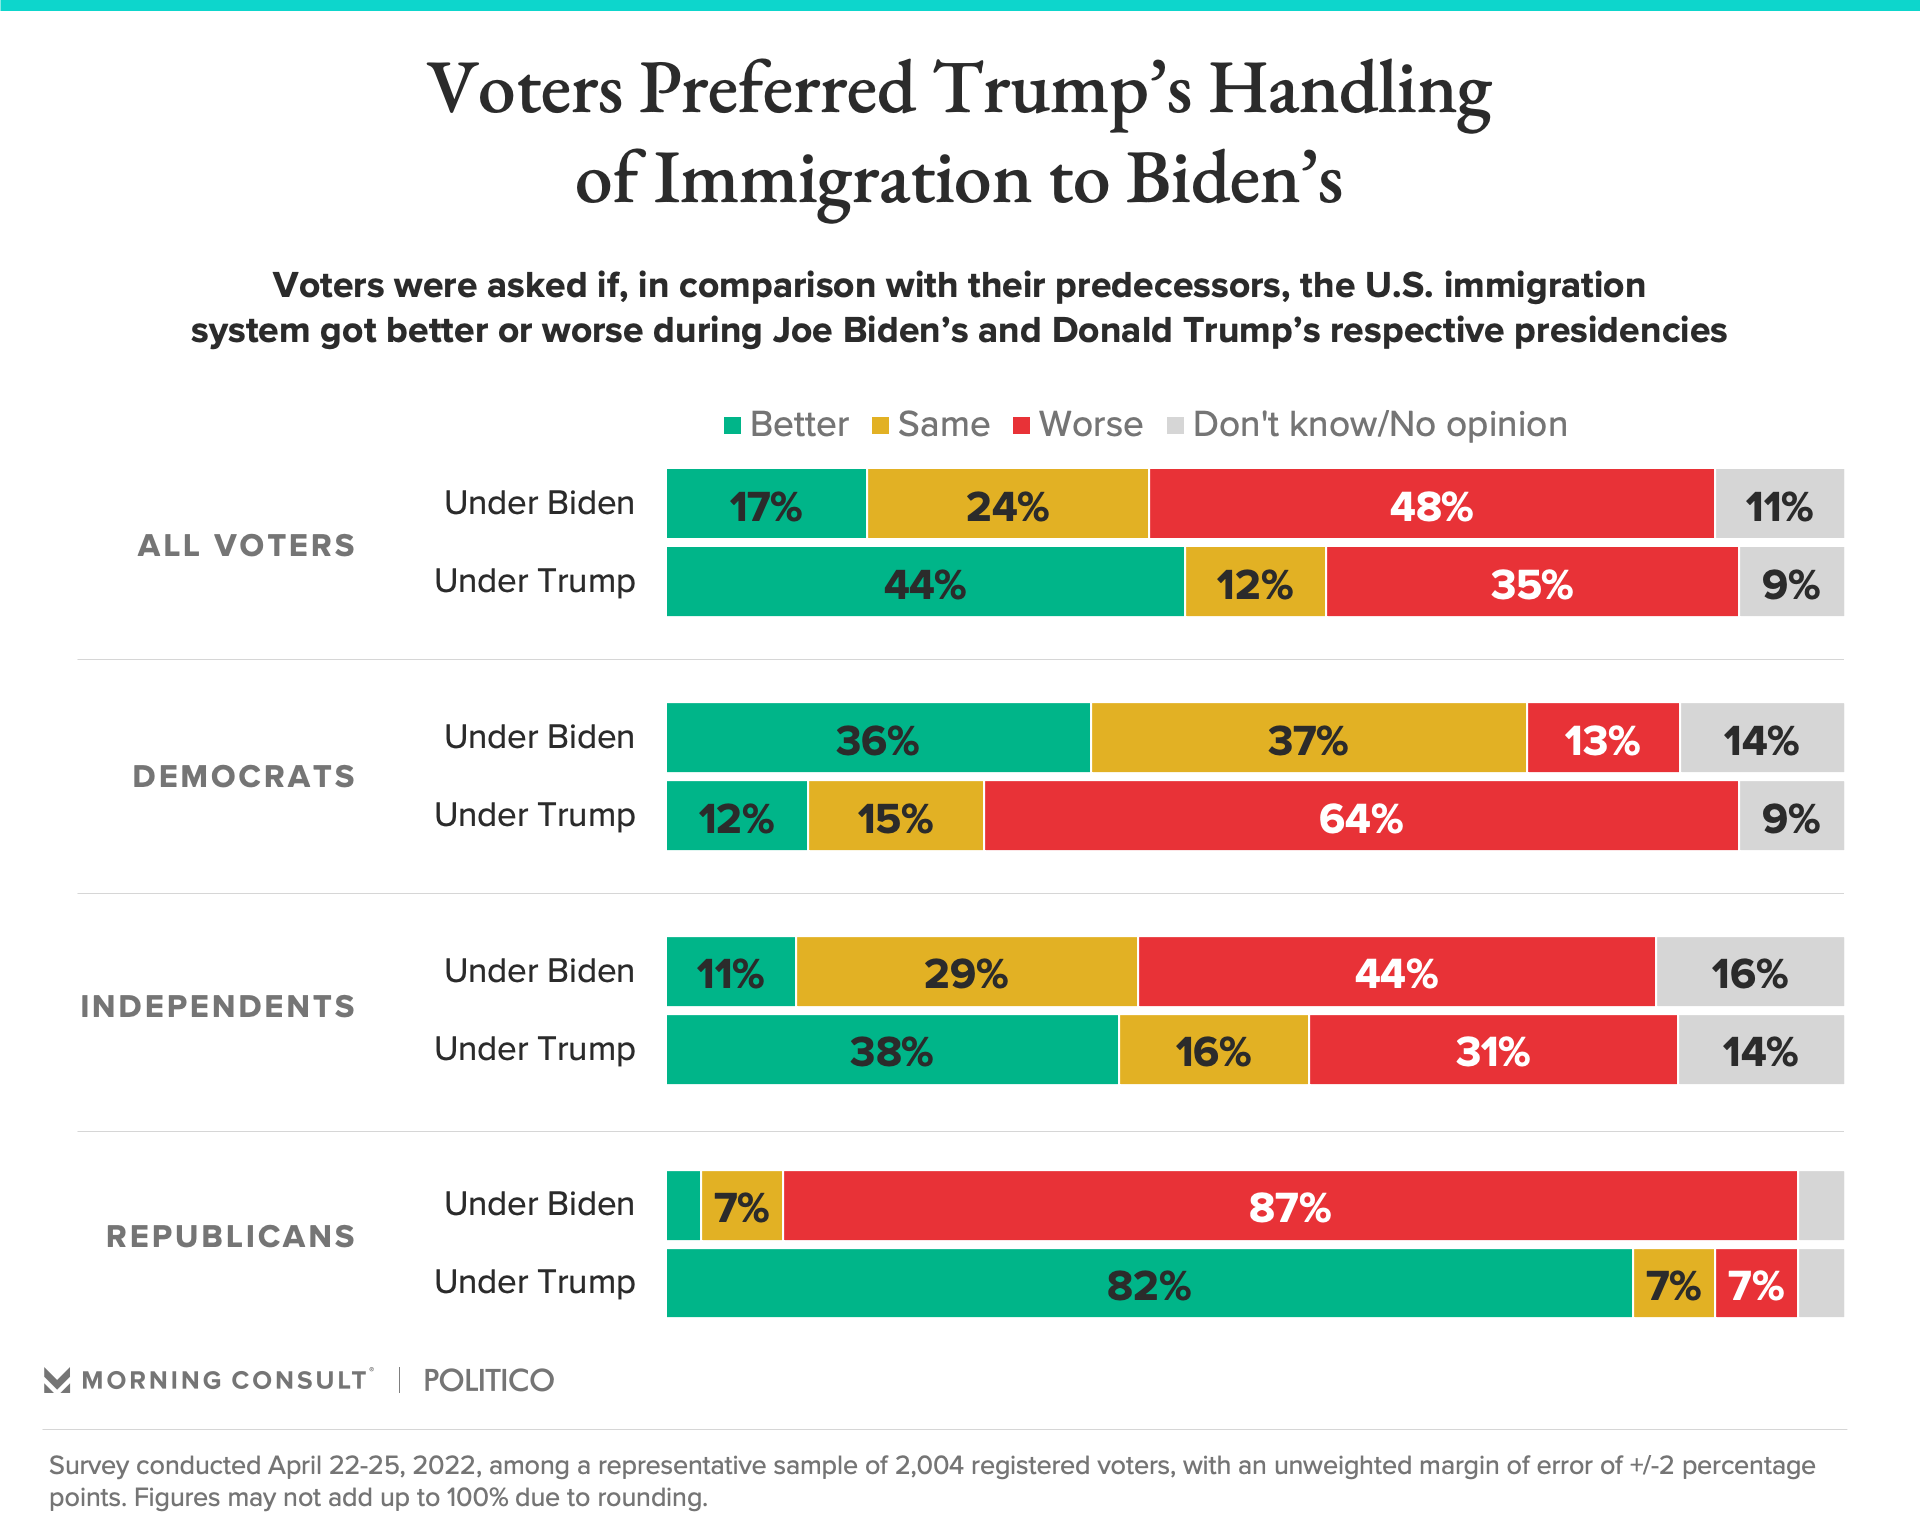 Chart depicting voter opinions on immigration policies under Trump compared to Biden, broken down by political party